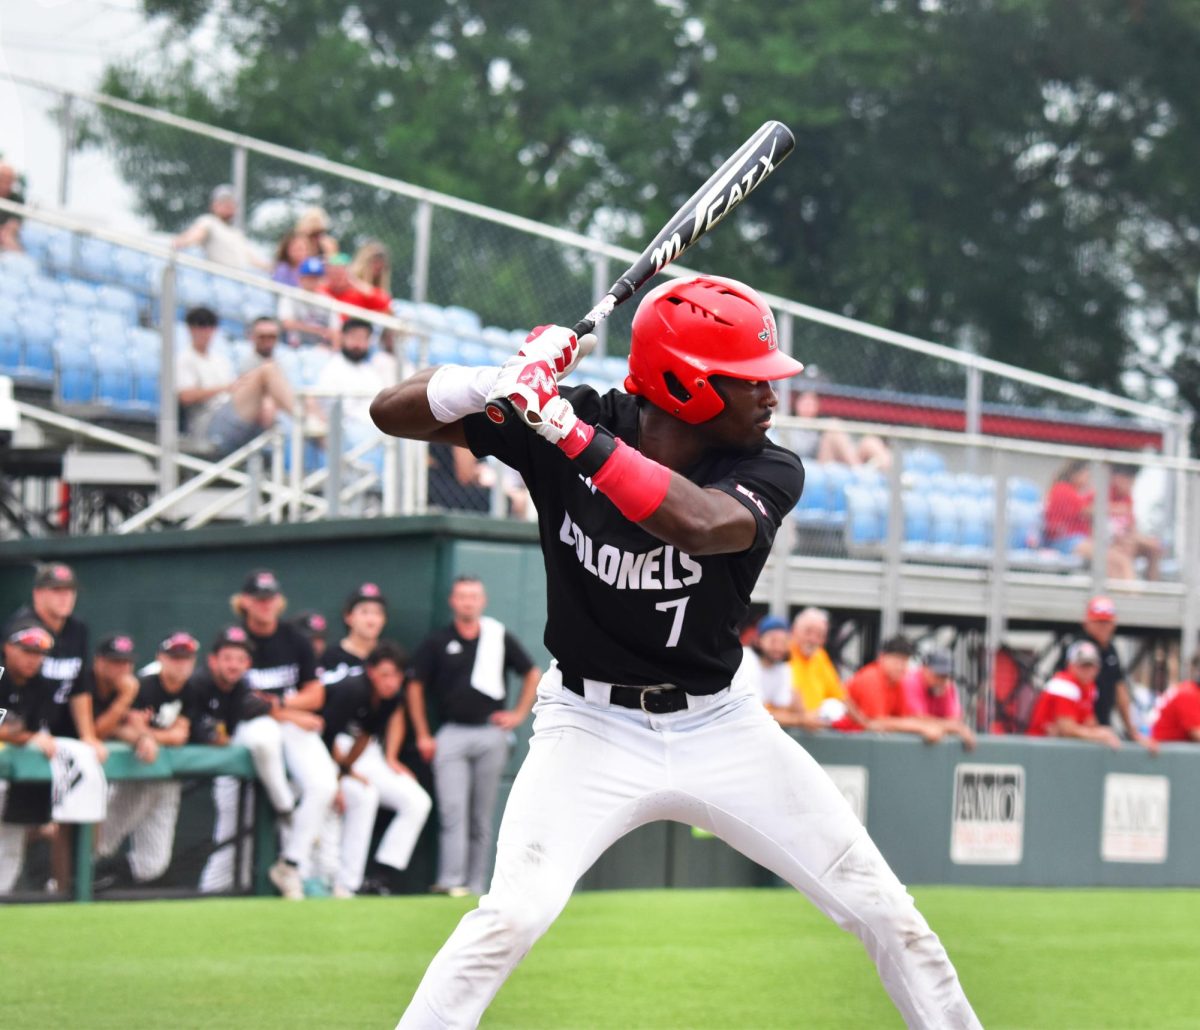 Basiel Williams taking his batting stance in an at-bat against McNeese(5/17).